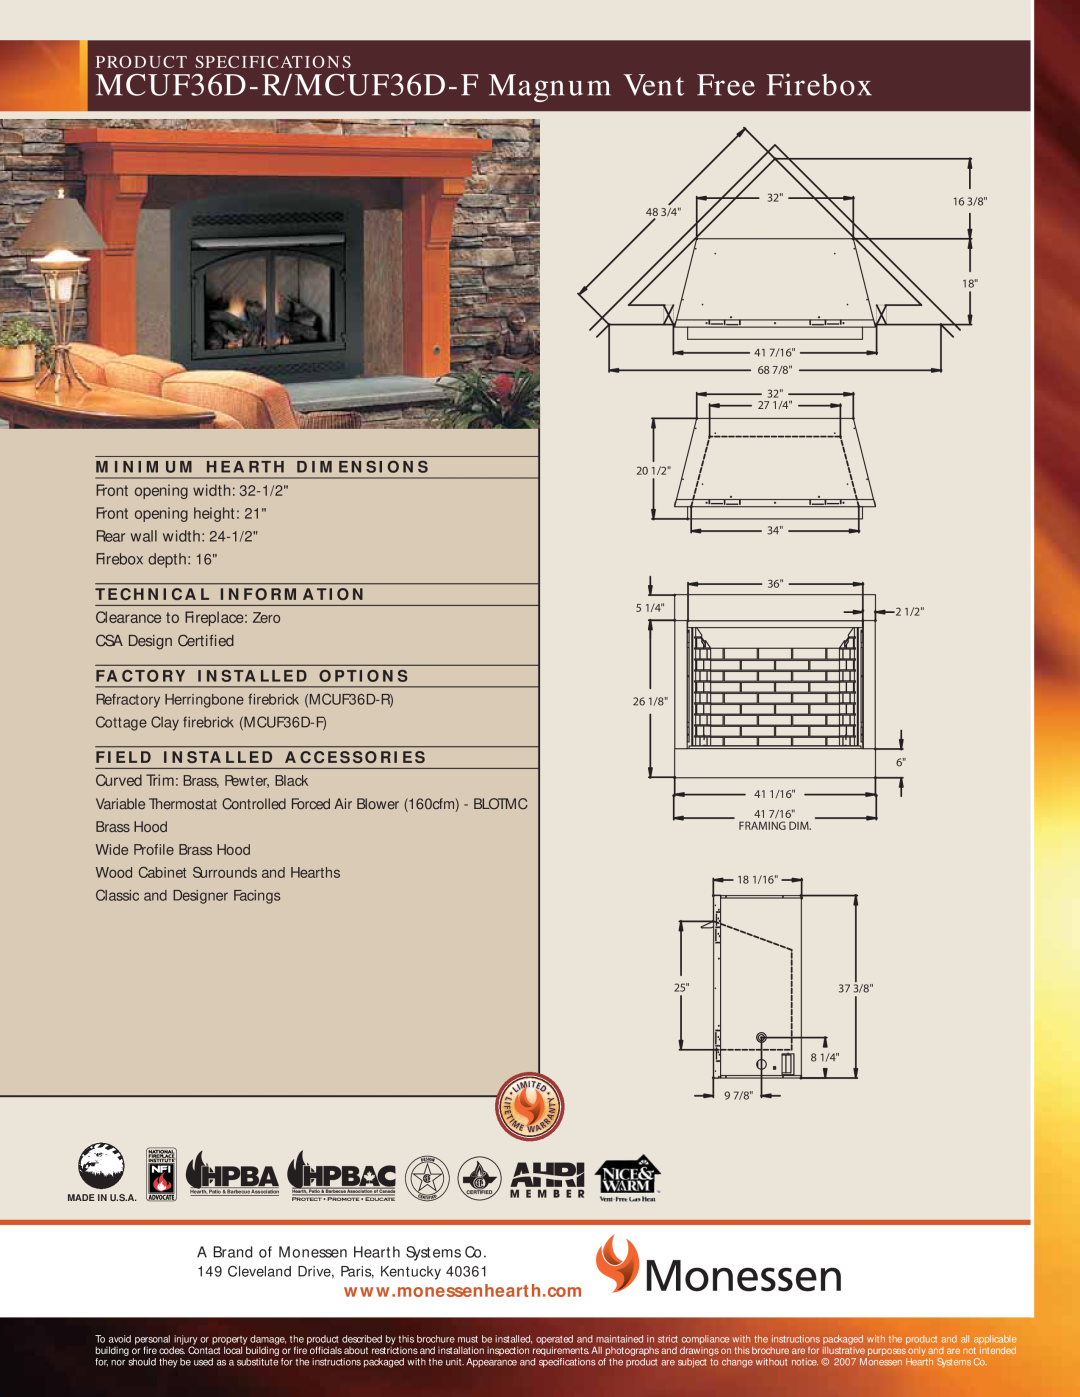 Monessen Hearth specifications MCUF36D-R/MCUF36D-FMagnum Vent Free Firebox, Product Specifications 